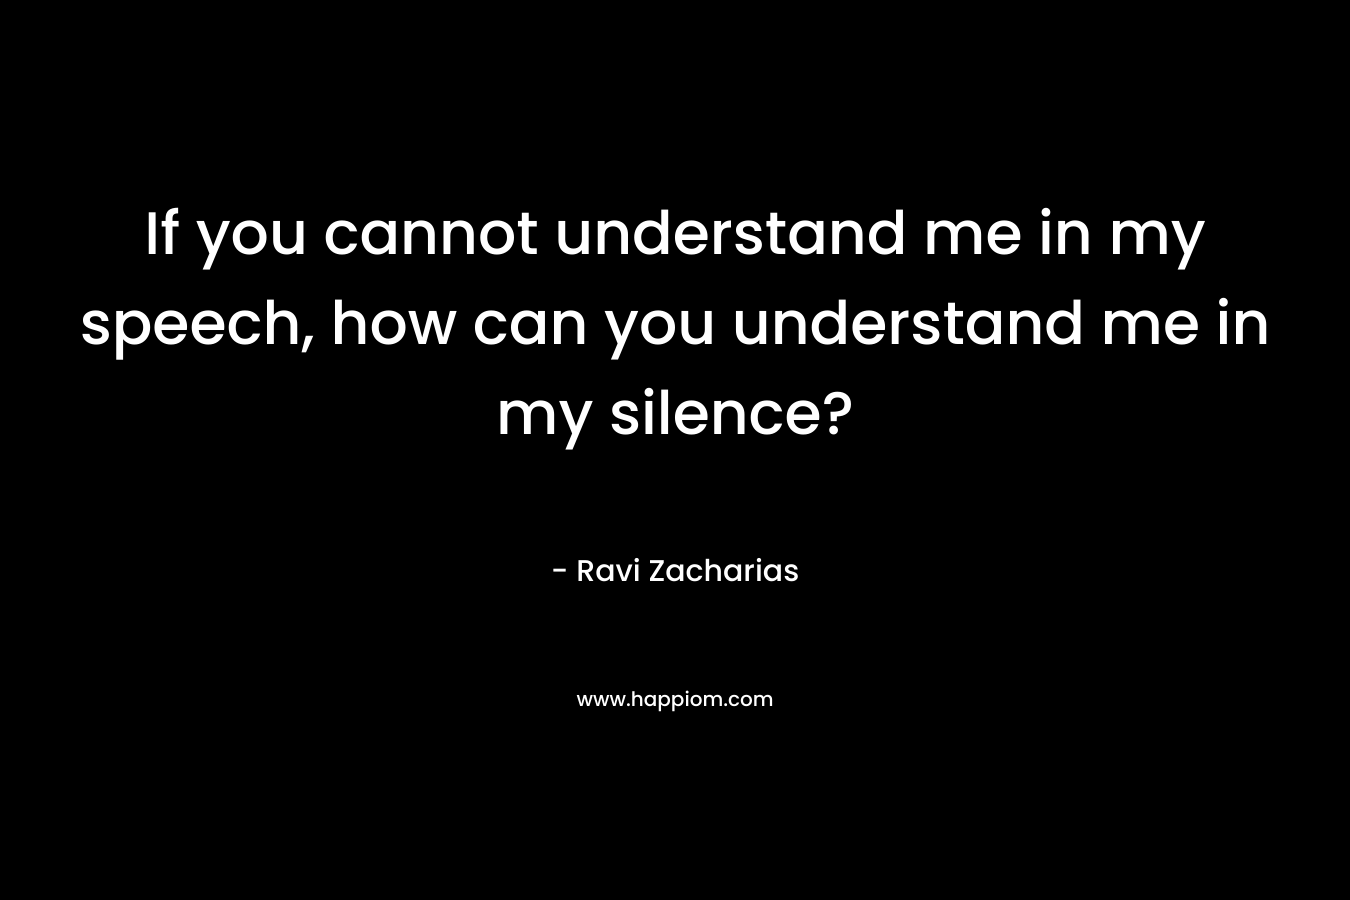 If you cannot understand me in my speech, how can you understand me in my silence?